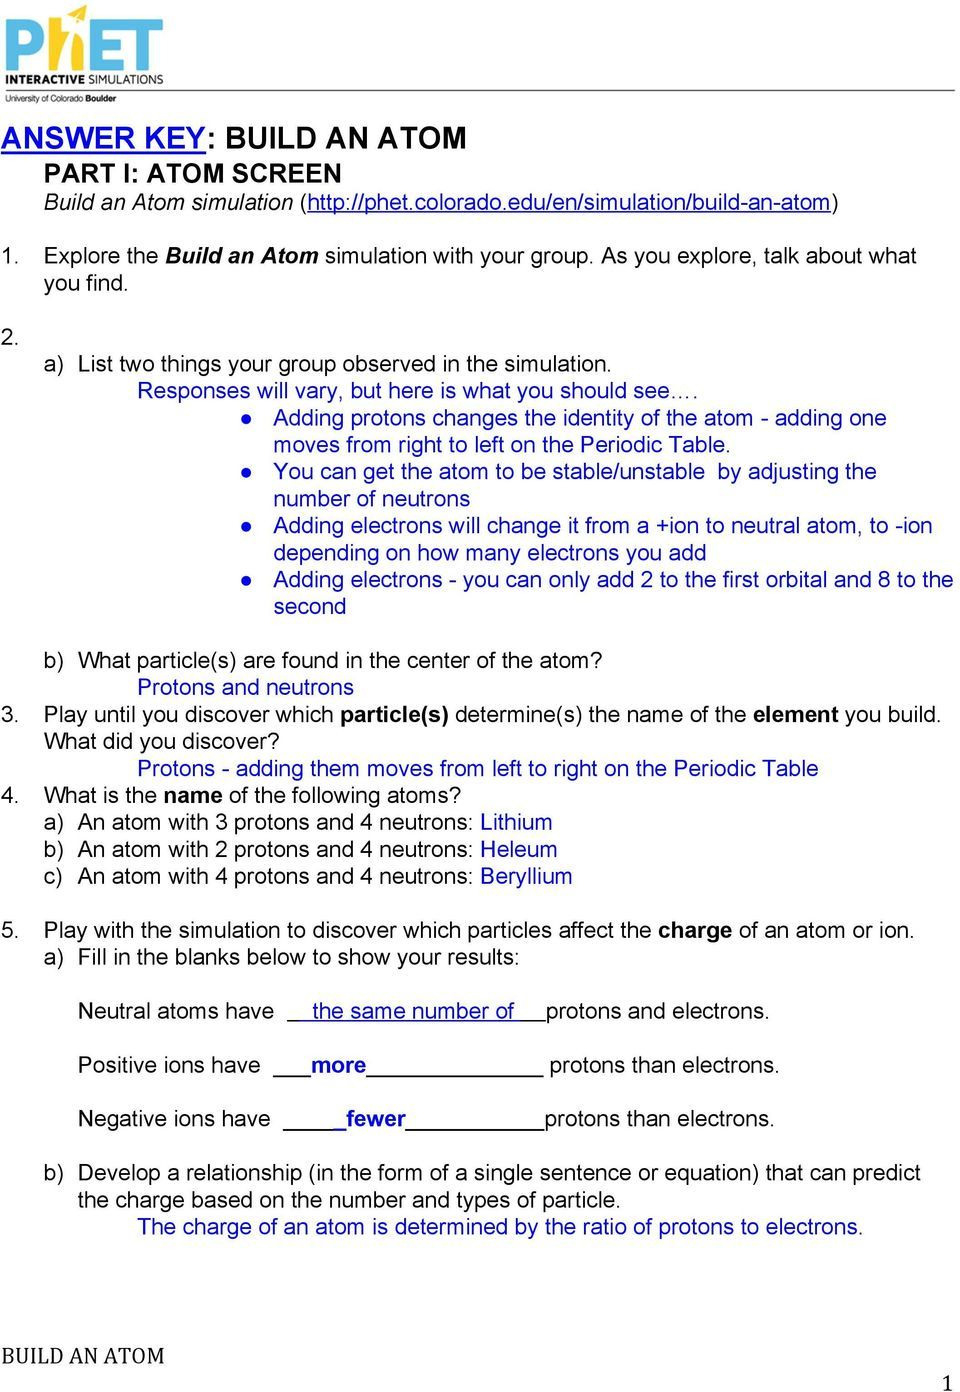 Biology Chapter 2 The Chemistry Of Life Worksheet Answers — db-excel.com